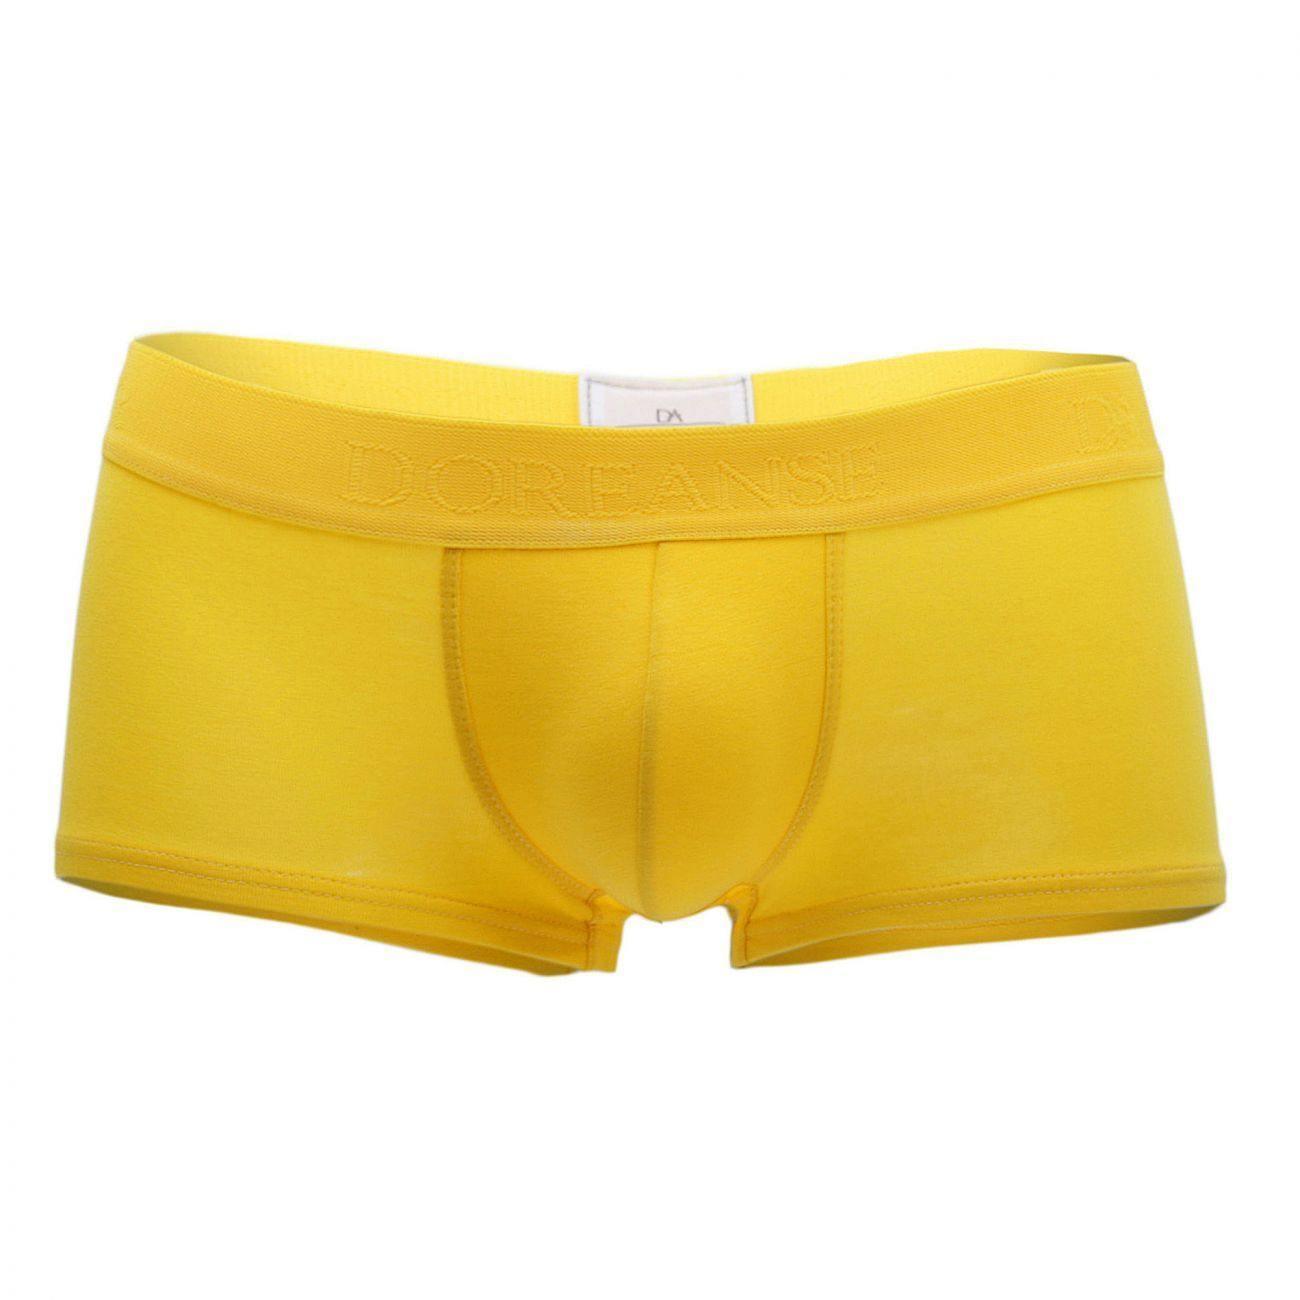 image of product,Low-rise Trunk - SEXYEONE 